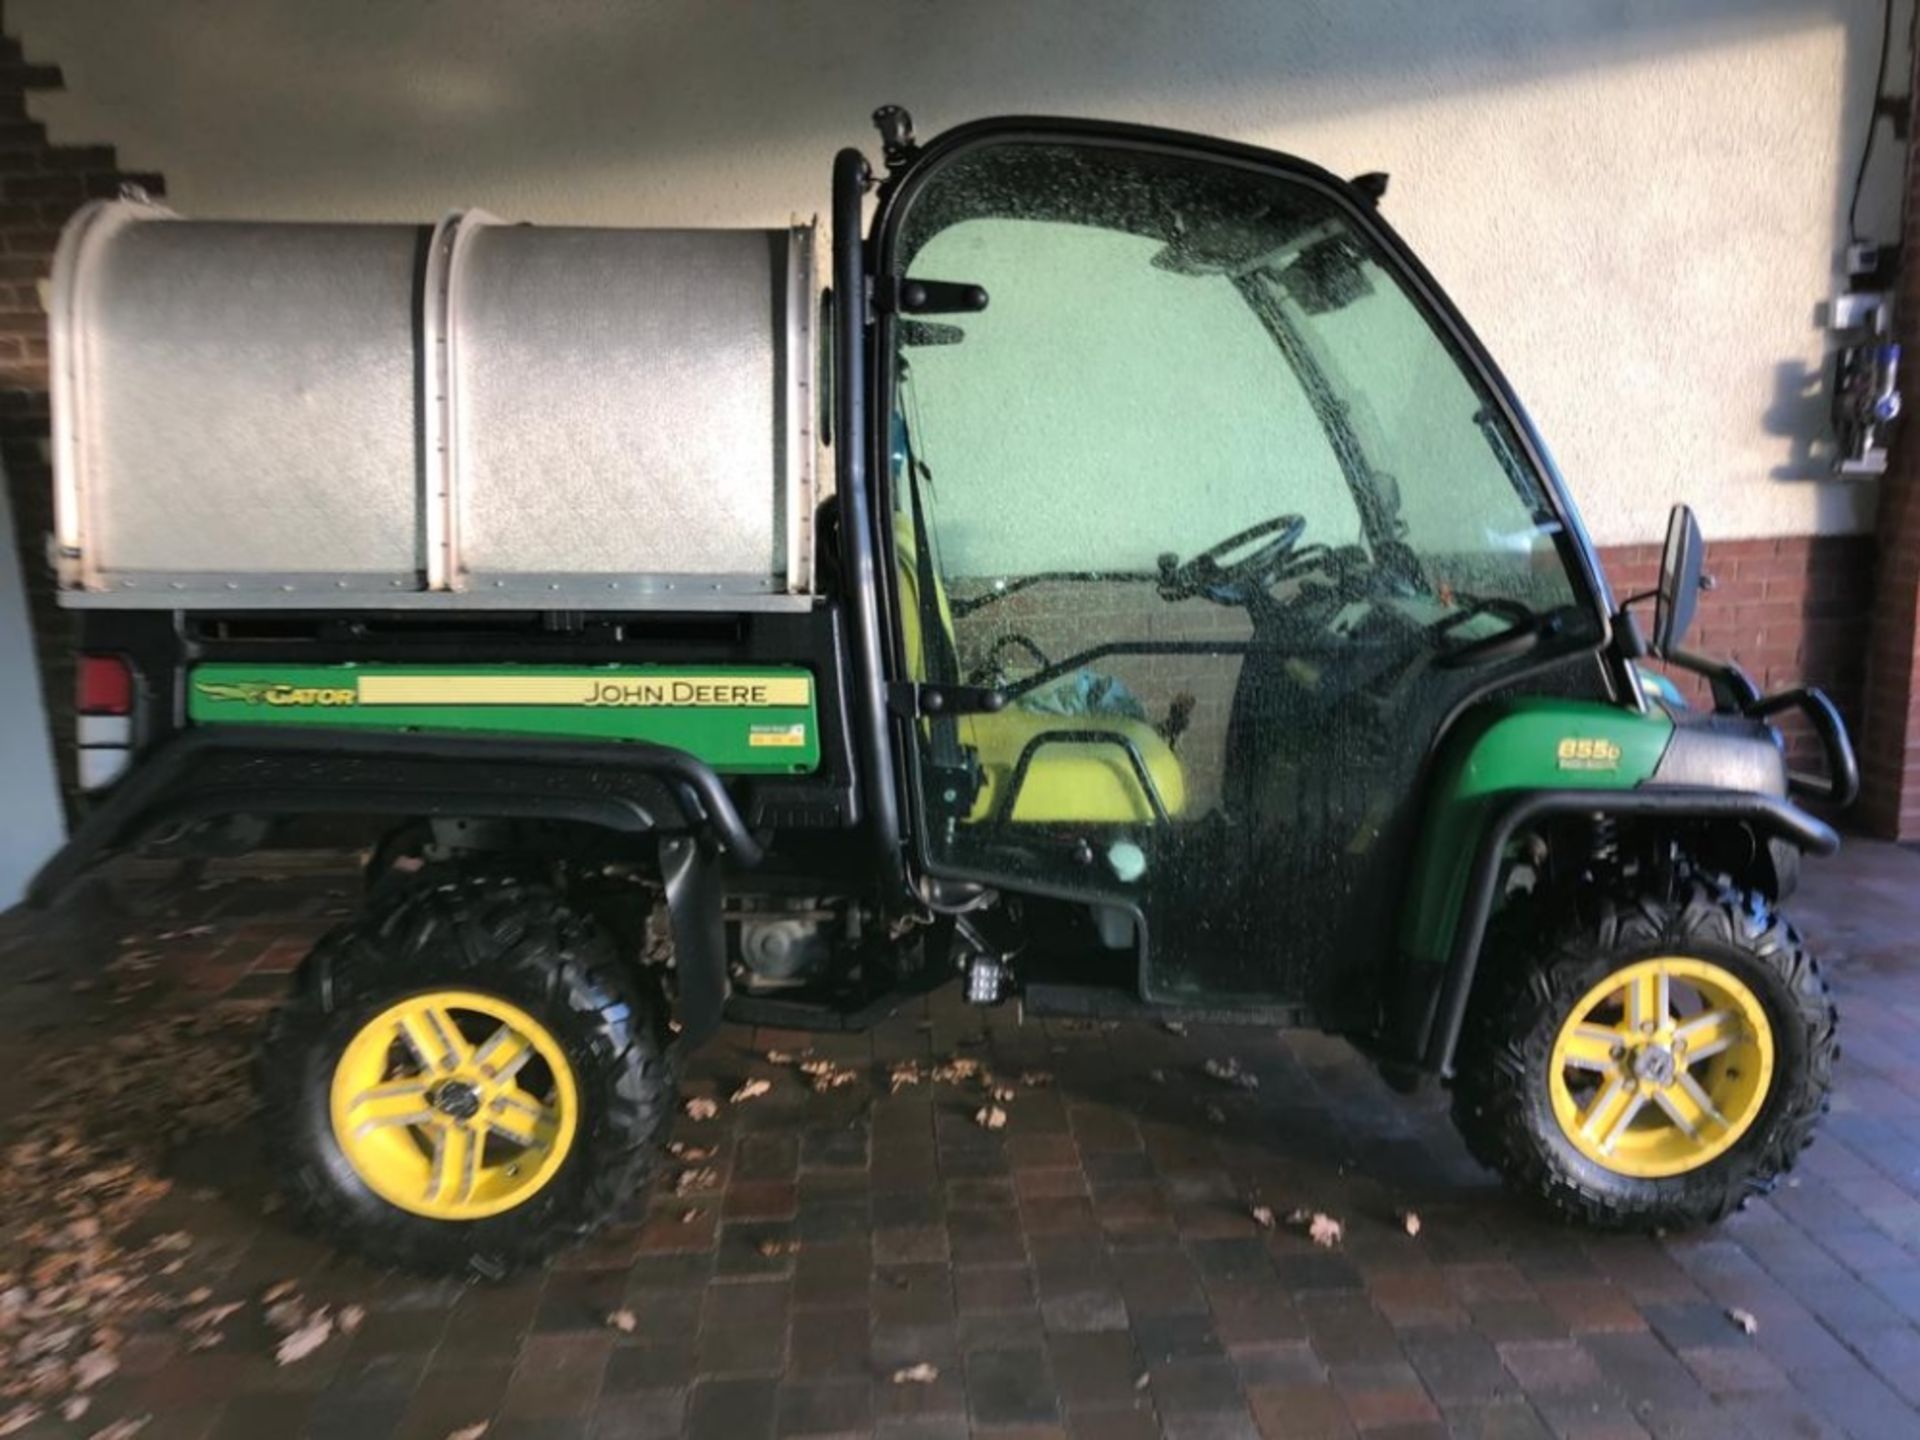 JOHN DEERE 855D GATOR 1263HRS WA14BWL 1 OWNER FROM NEW ROAD LEGAL GLASS DOORS REAR CANOPY - Image 4 of 11